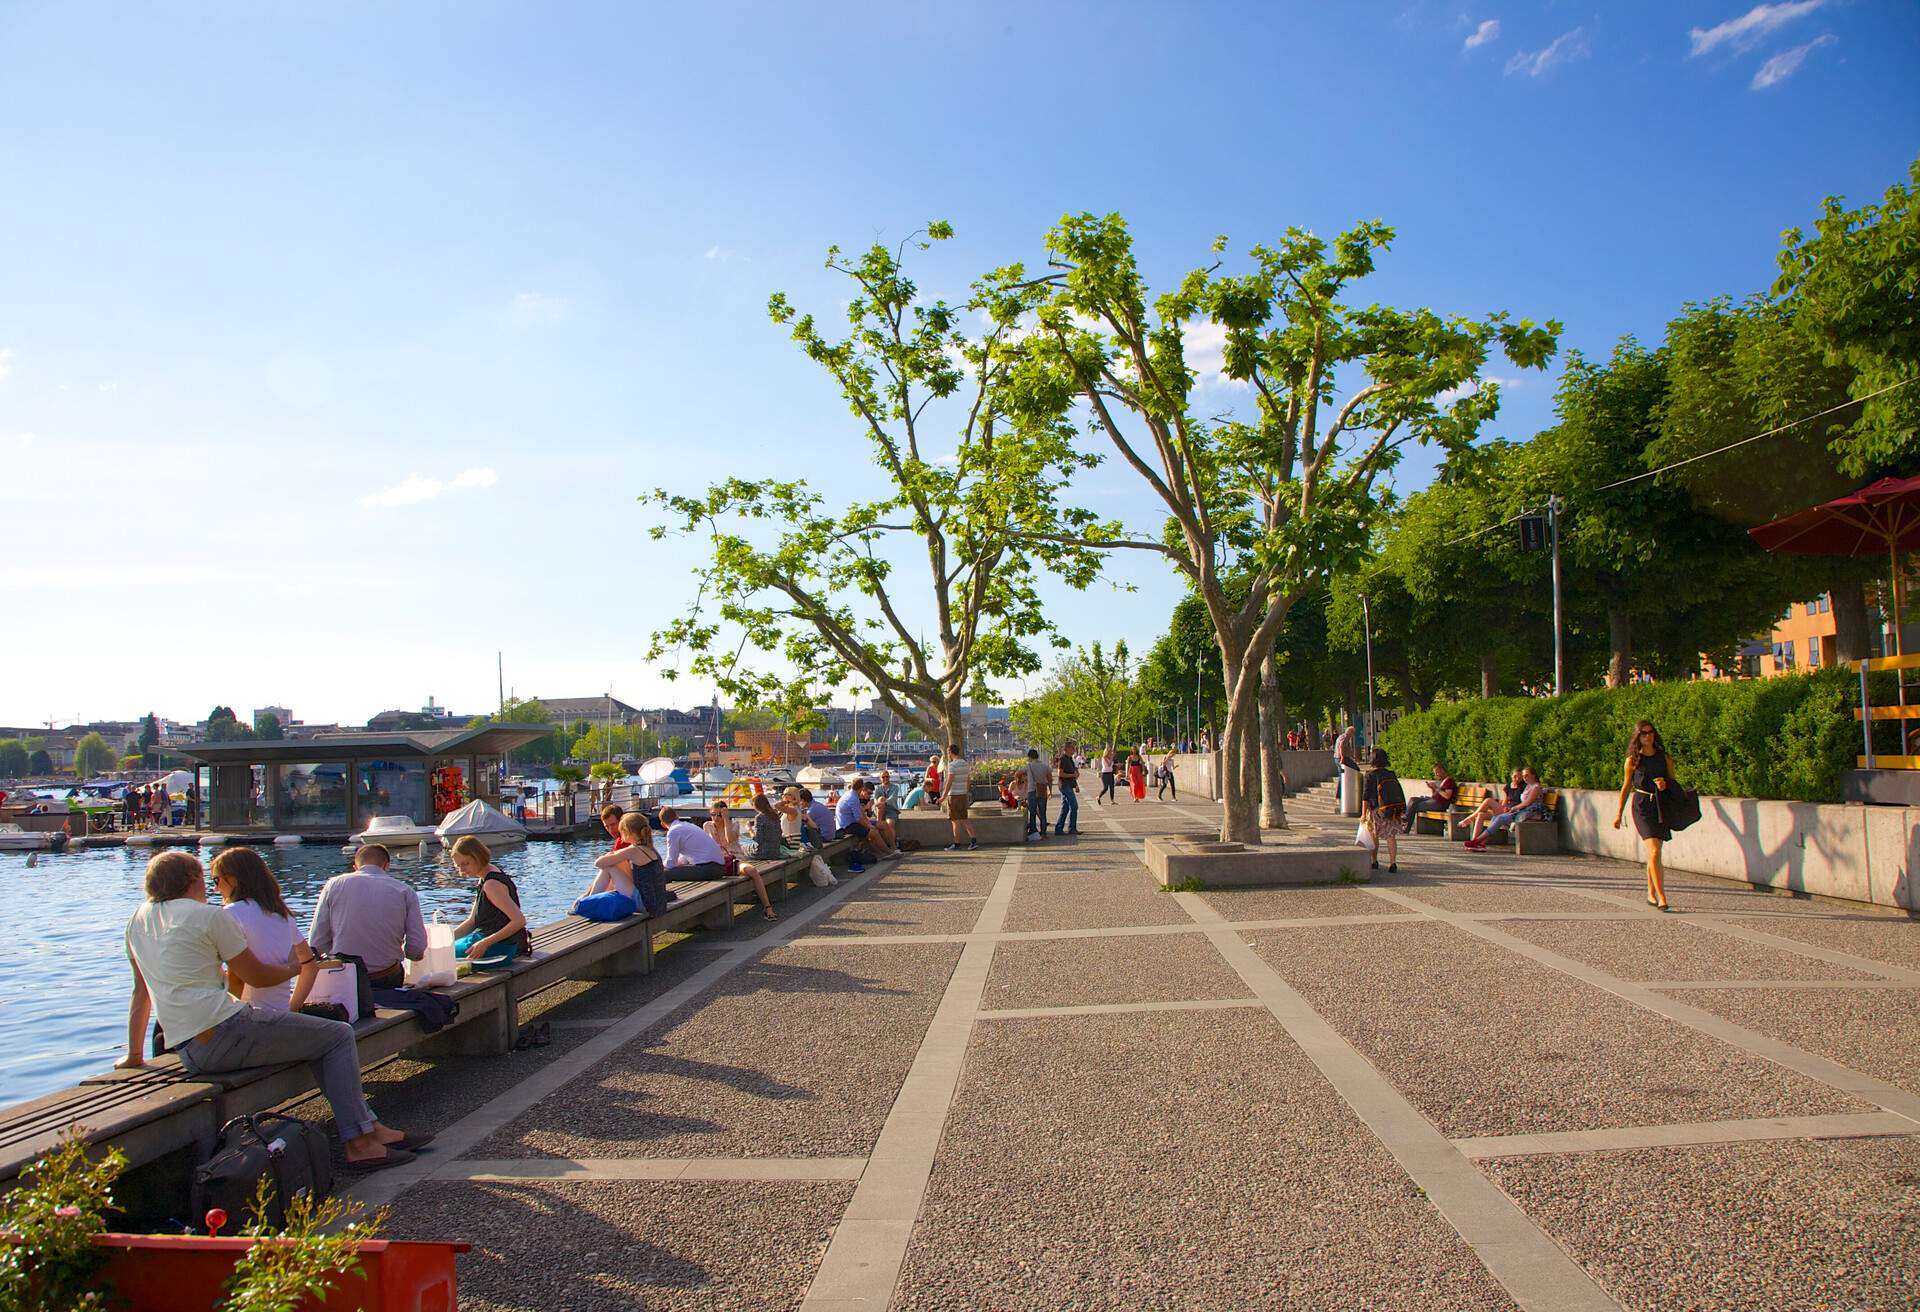 People sitting on benches in late afternoon at Utoquai Promenade, a beautiful pedestrian walk along eastern side of Lake Zurich, Switzerland.  Promenade was built in 1887 and planted with Chestnut trees.